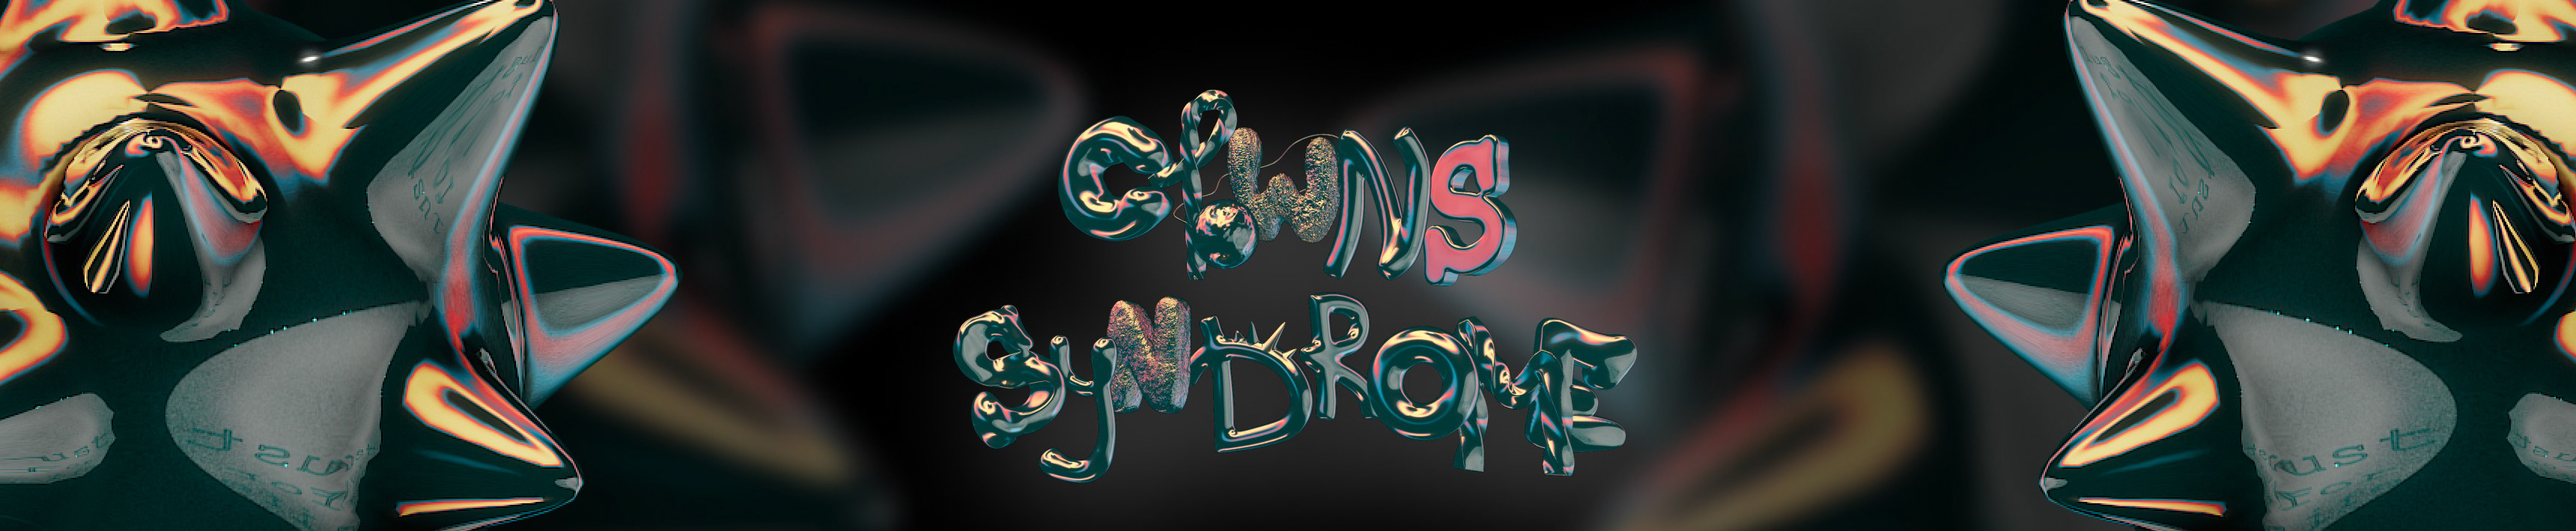 Clown's Syndrome's profile banner